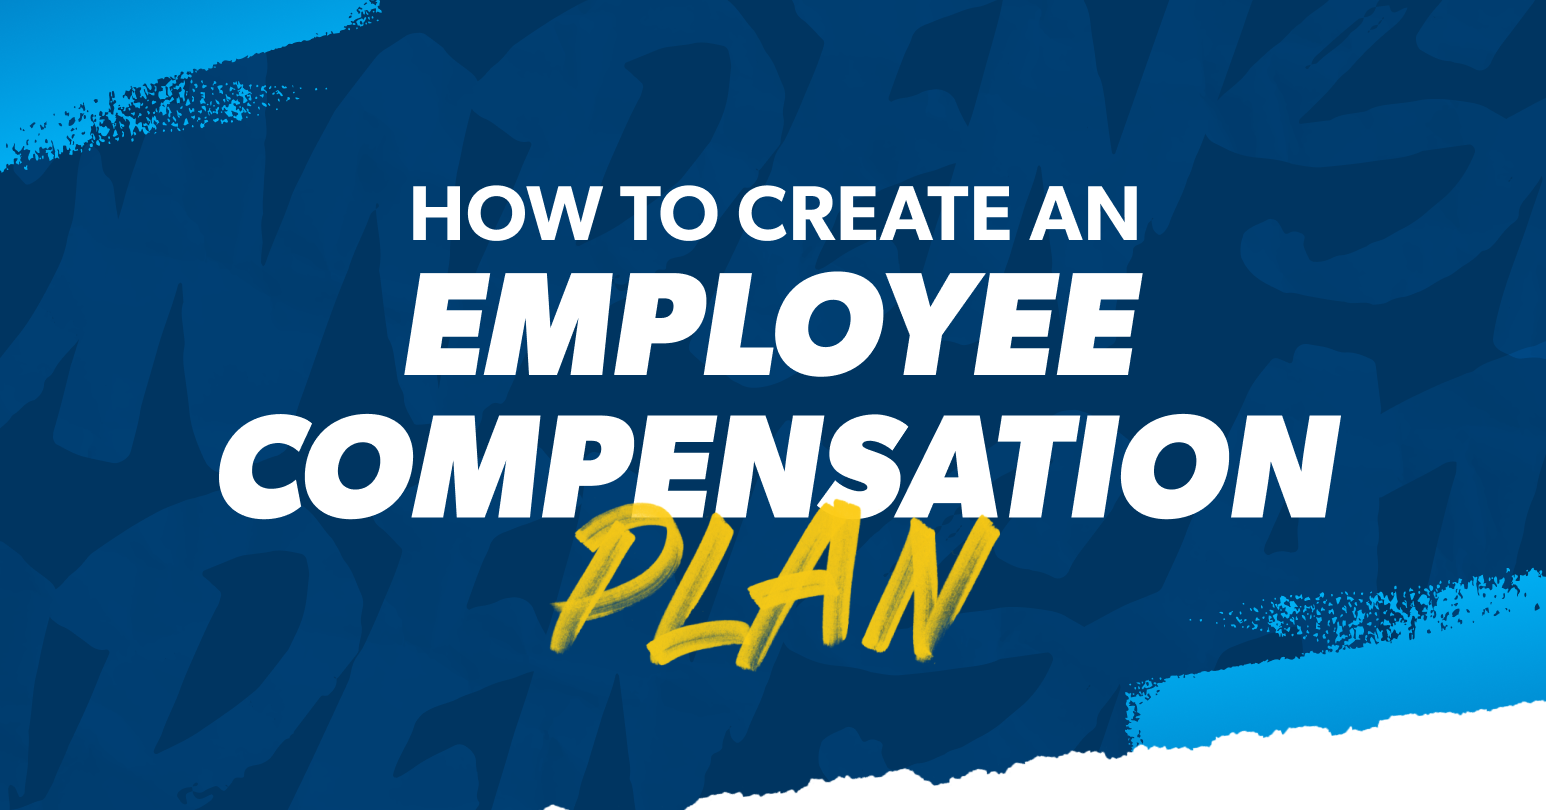 How to Create an Employee Compensation Plan